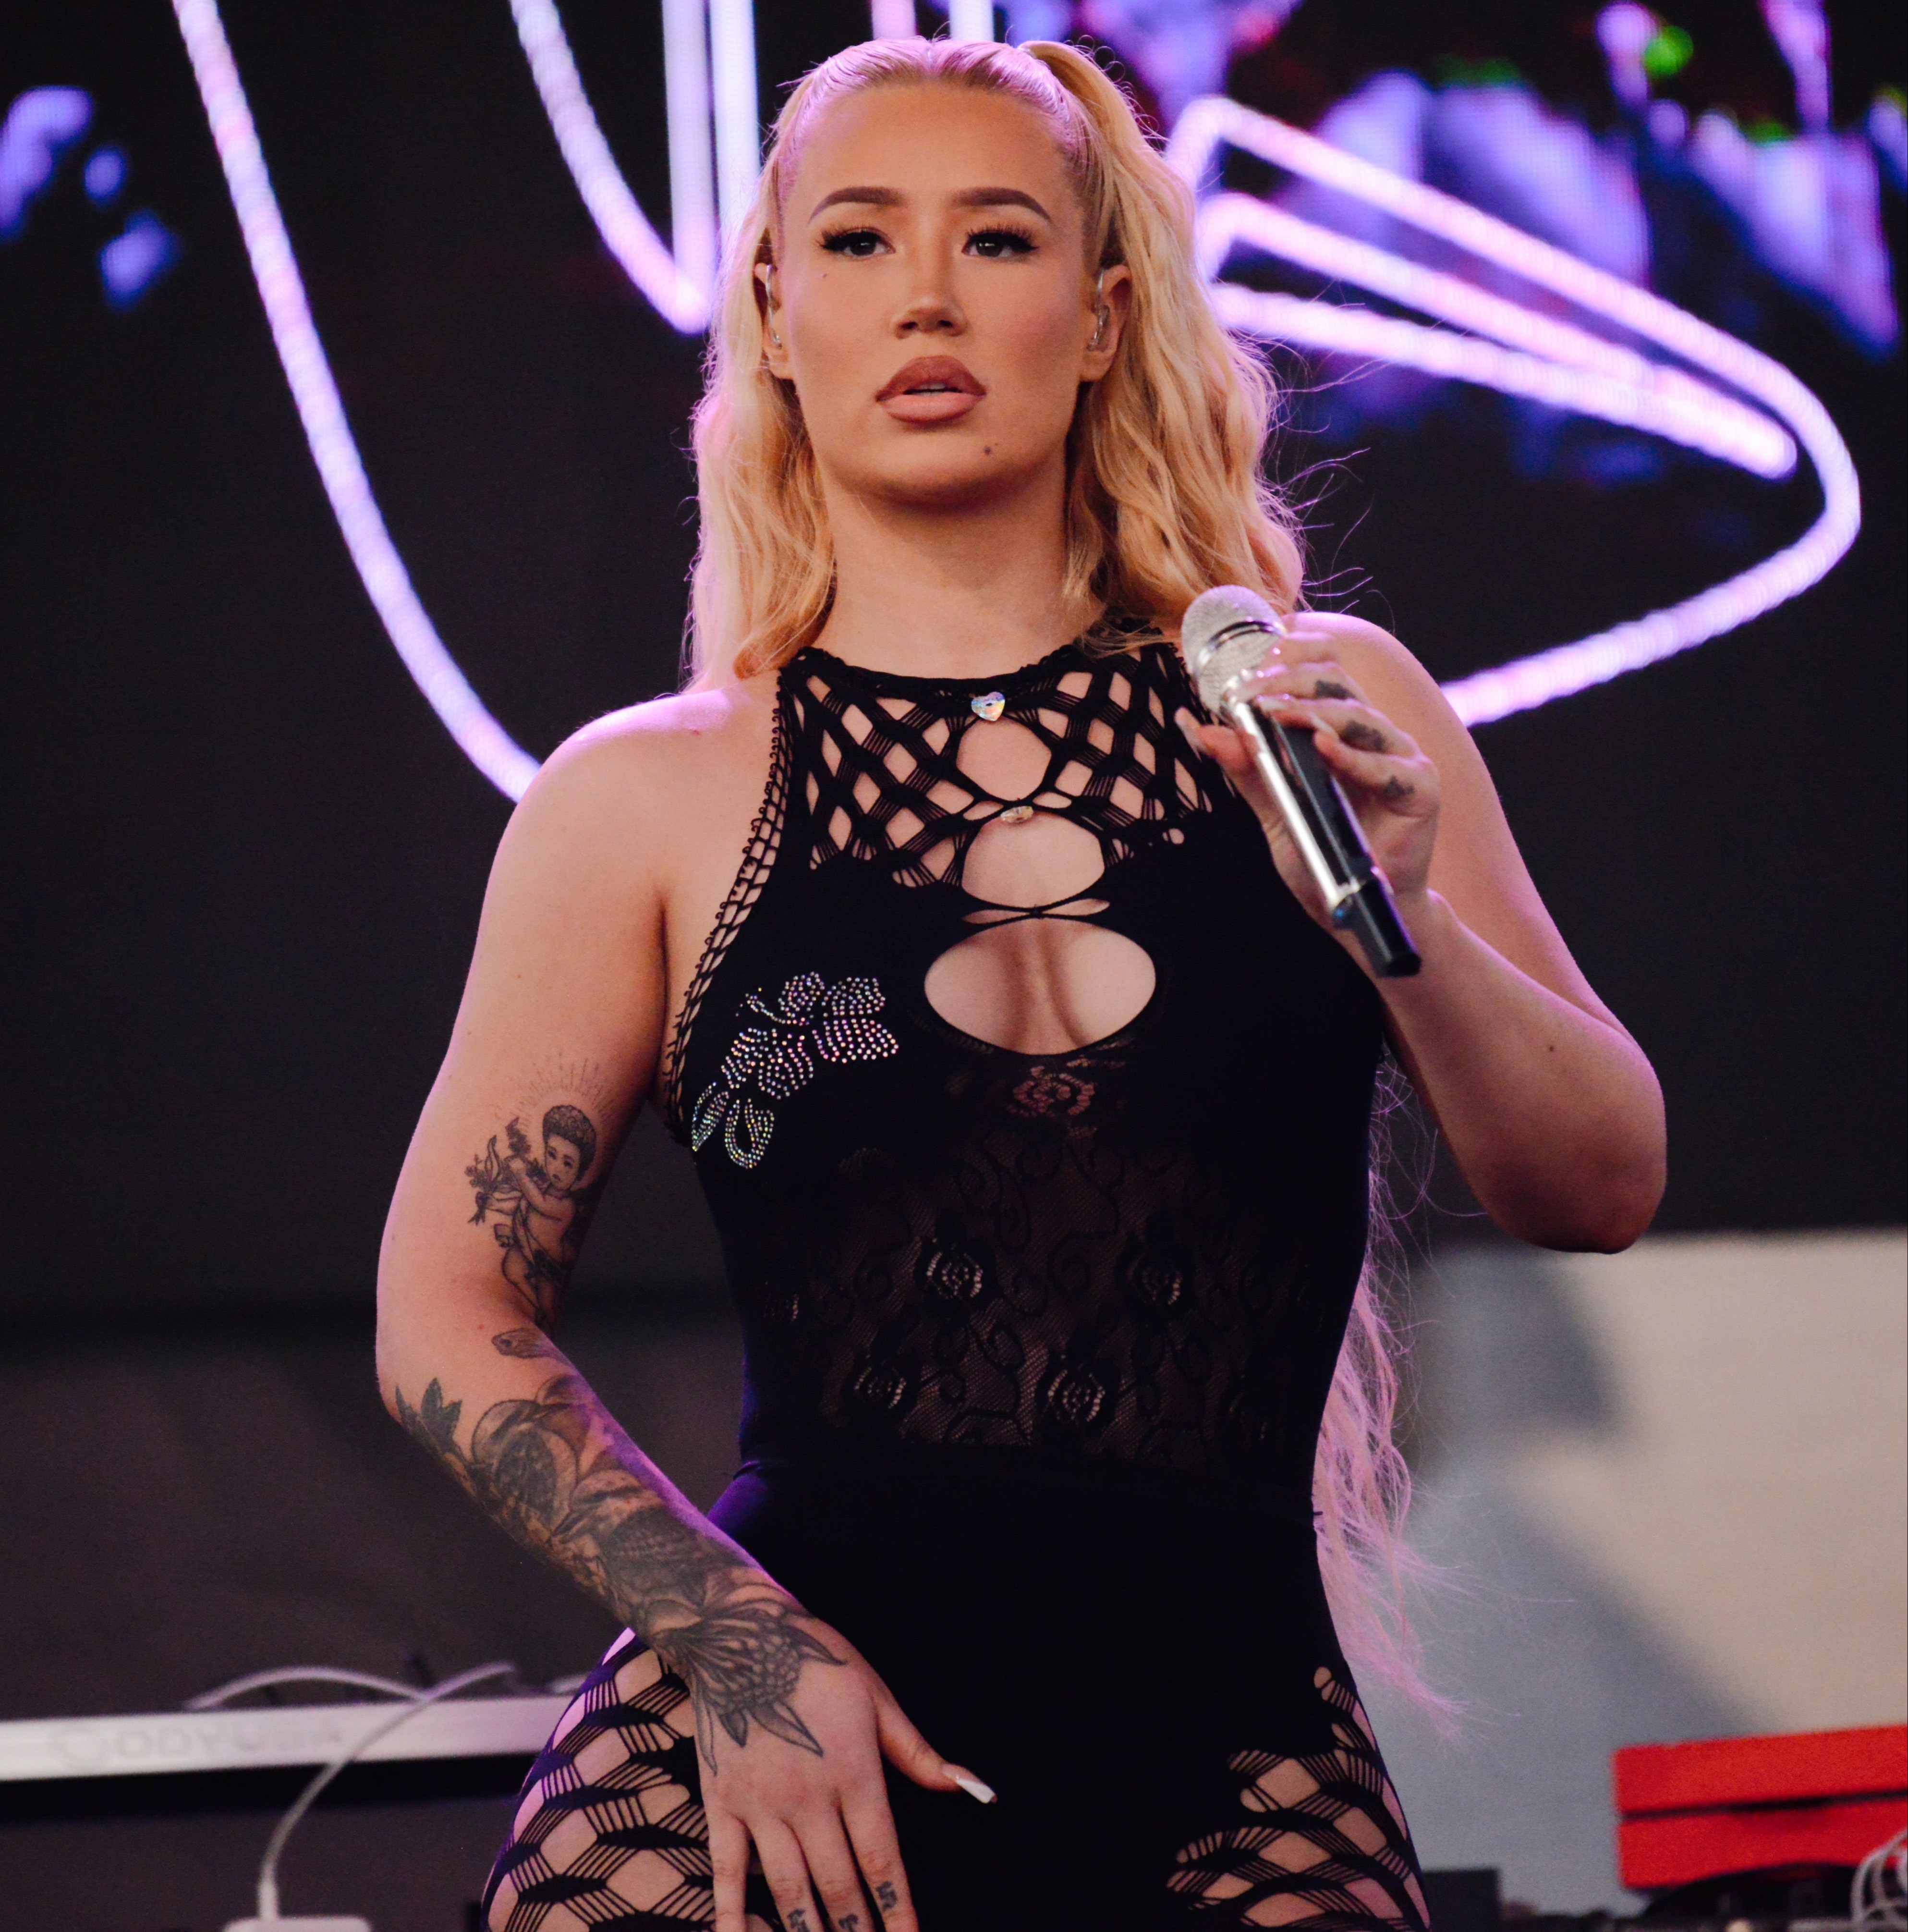 Iggy Azalea recently topped the list of highest earning celebrities on the platform